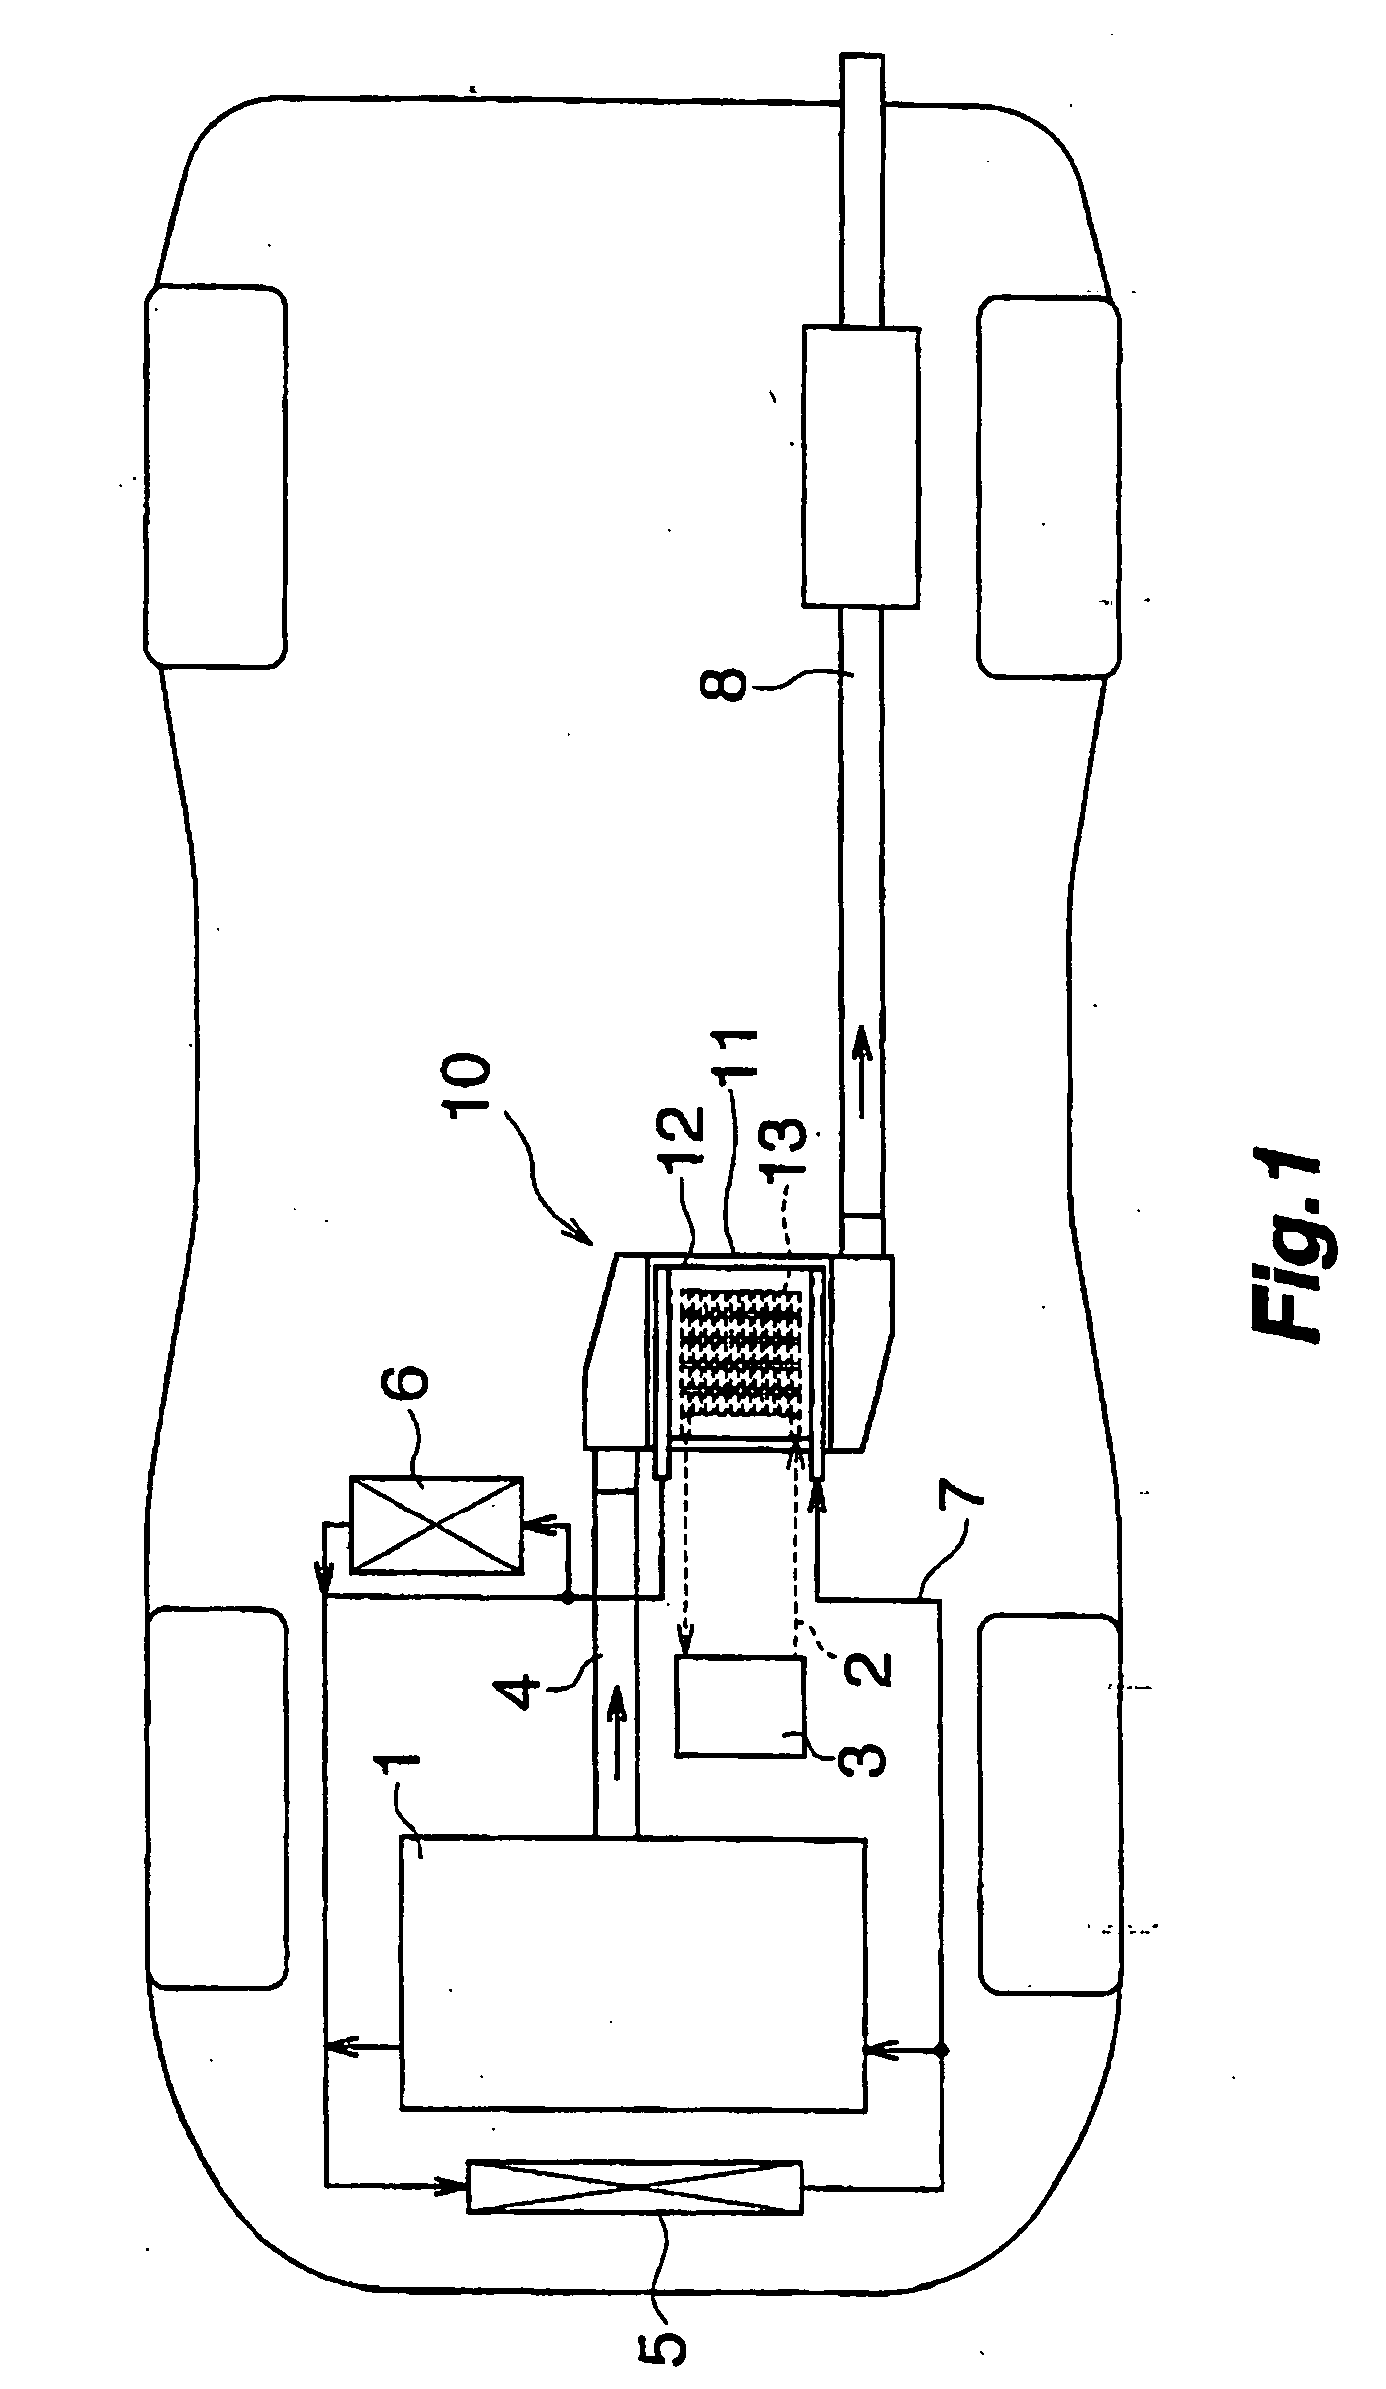 Waste heat recovery system and thermoelectric conversion system